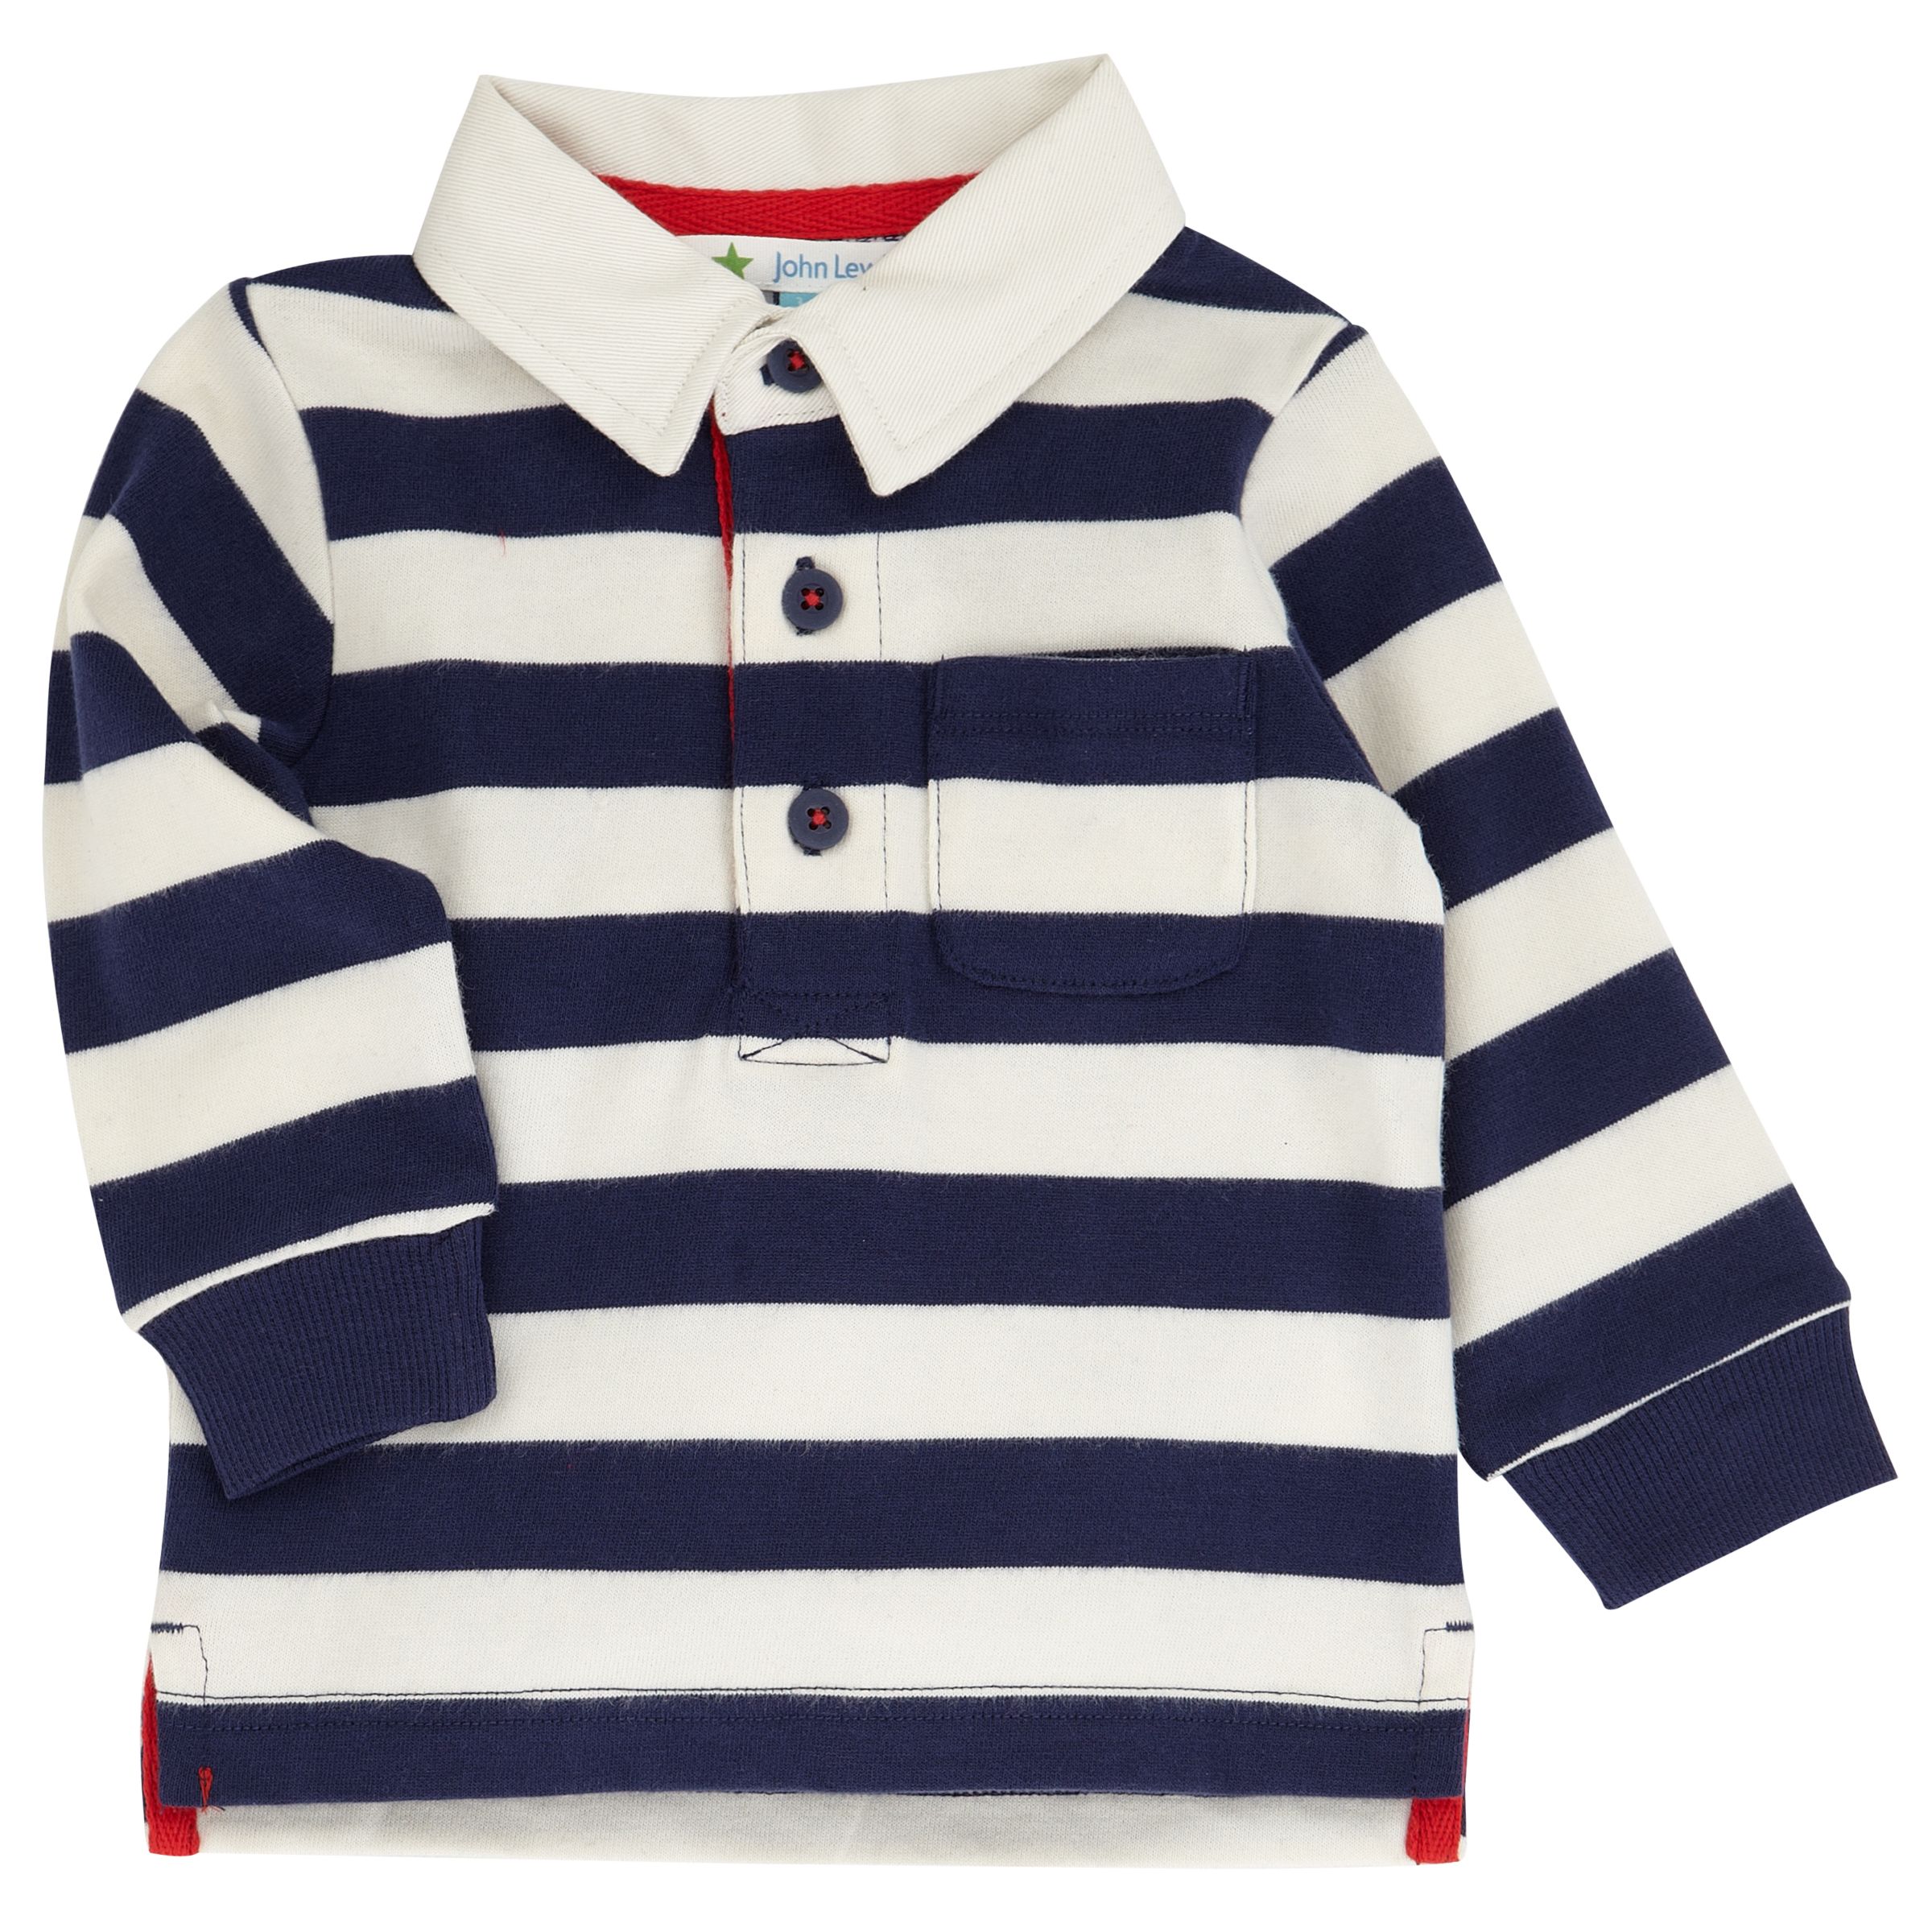 John Lewis & Partners Baby Rugby Top, Navy/White